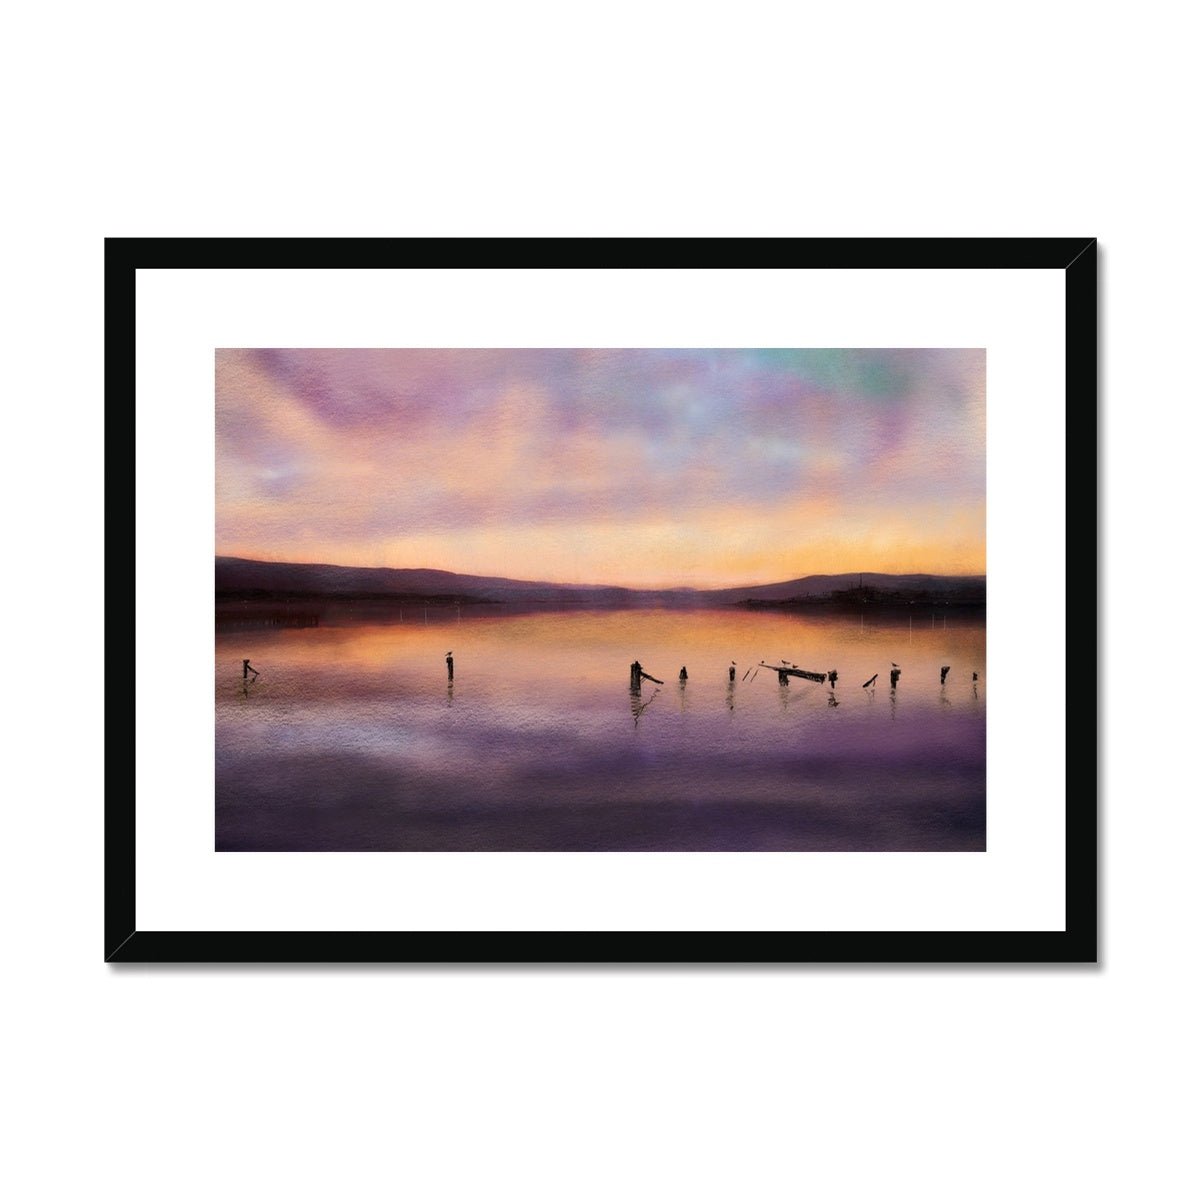 Admiralty Jetty Dusk Painting | Framed & Mounted Prints From Scotland-Framed & Mounted Prints-River Clyde Art Gallery-A2 Landscape-Black Frame-Paintings, Prints, Homeware, Art Gifts From Scotland By Scottish Artist Kevin Hunter